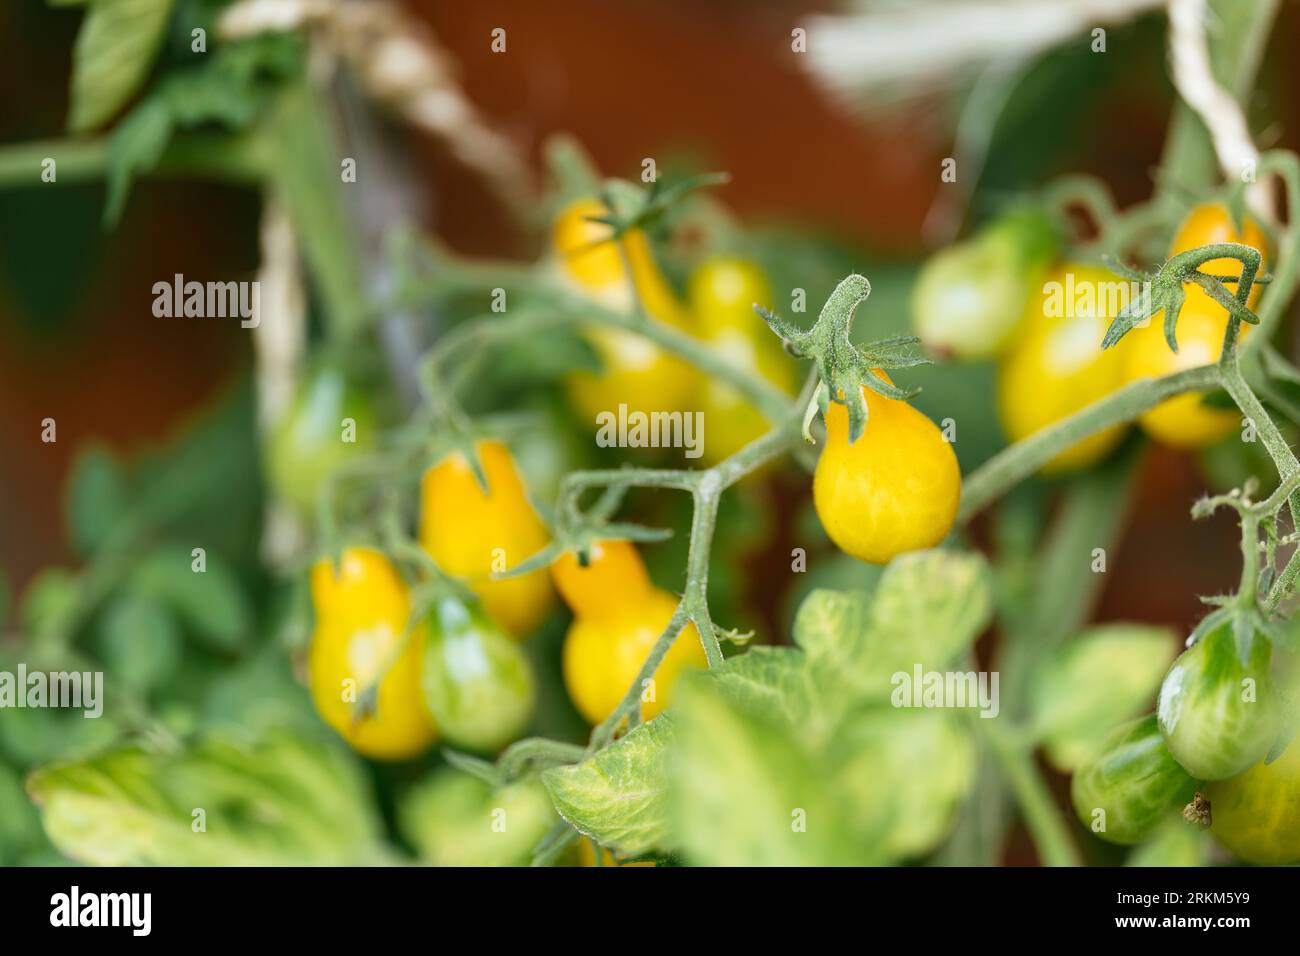 Old German heirloom pear-shaped 'Dattelwein' cherry tomato variety. Stock Photo